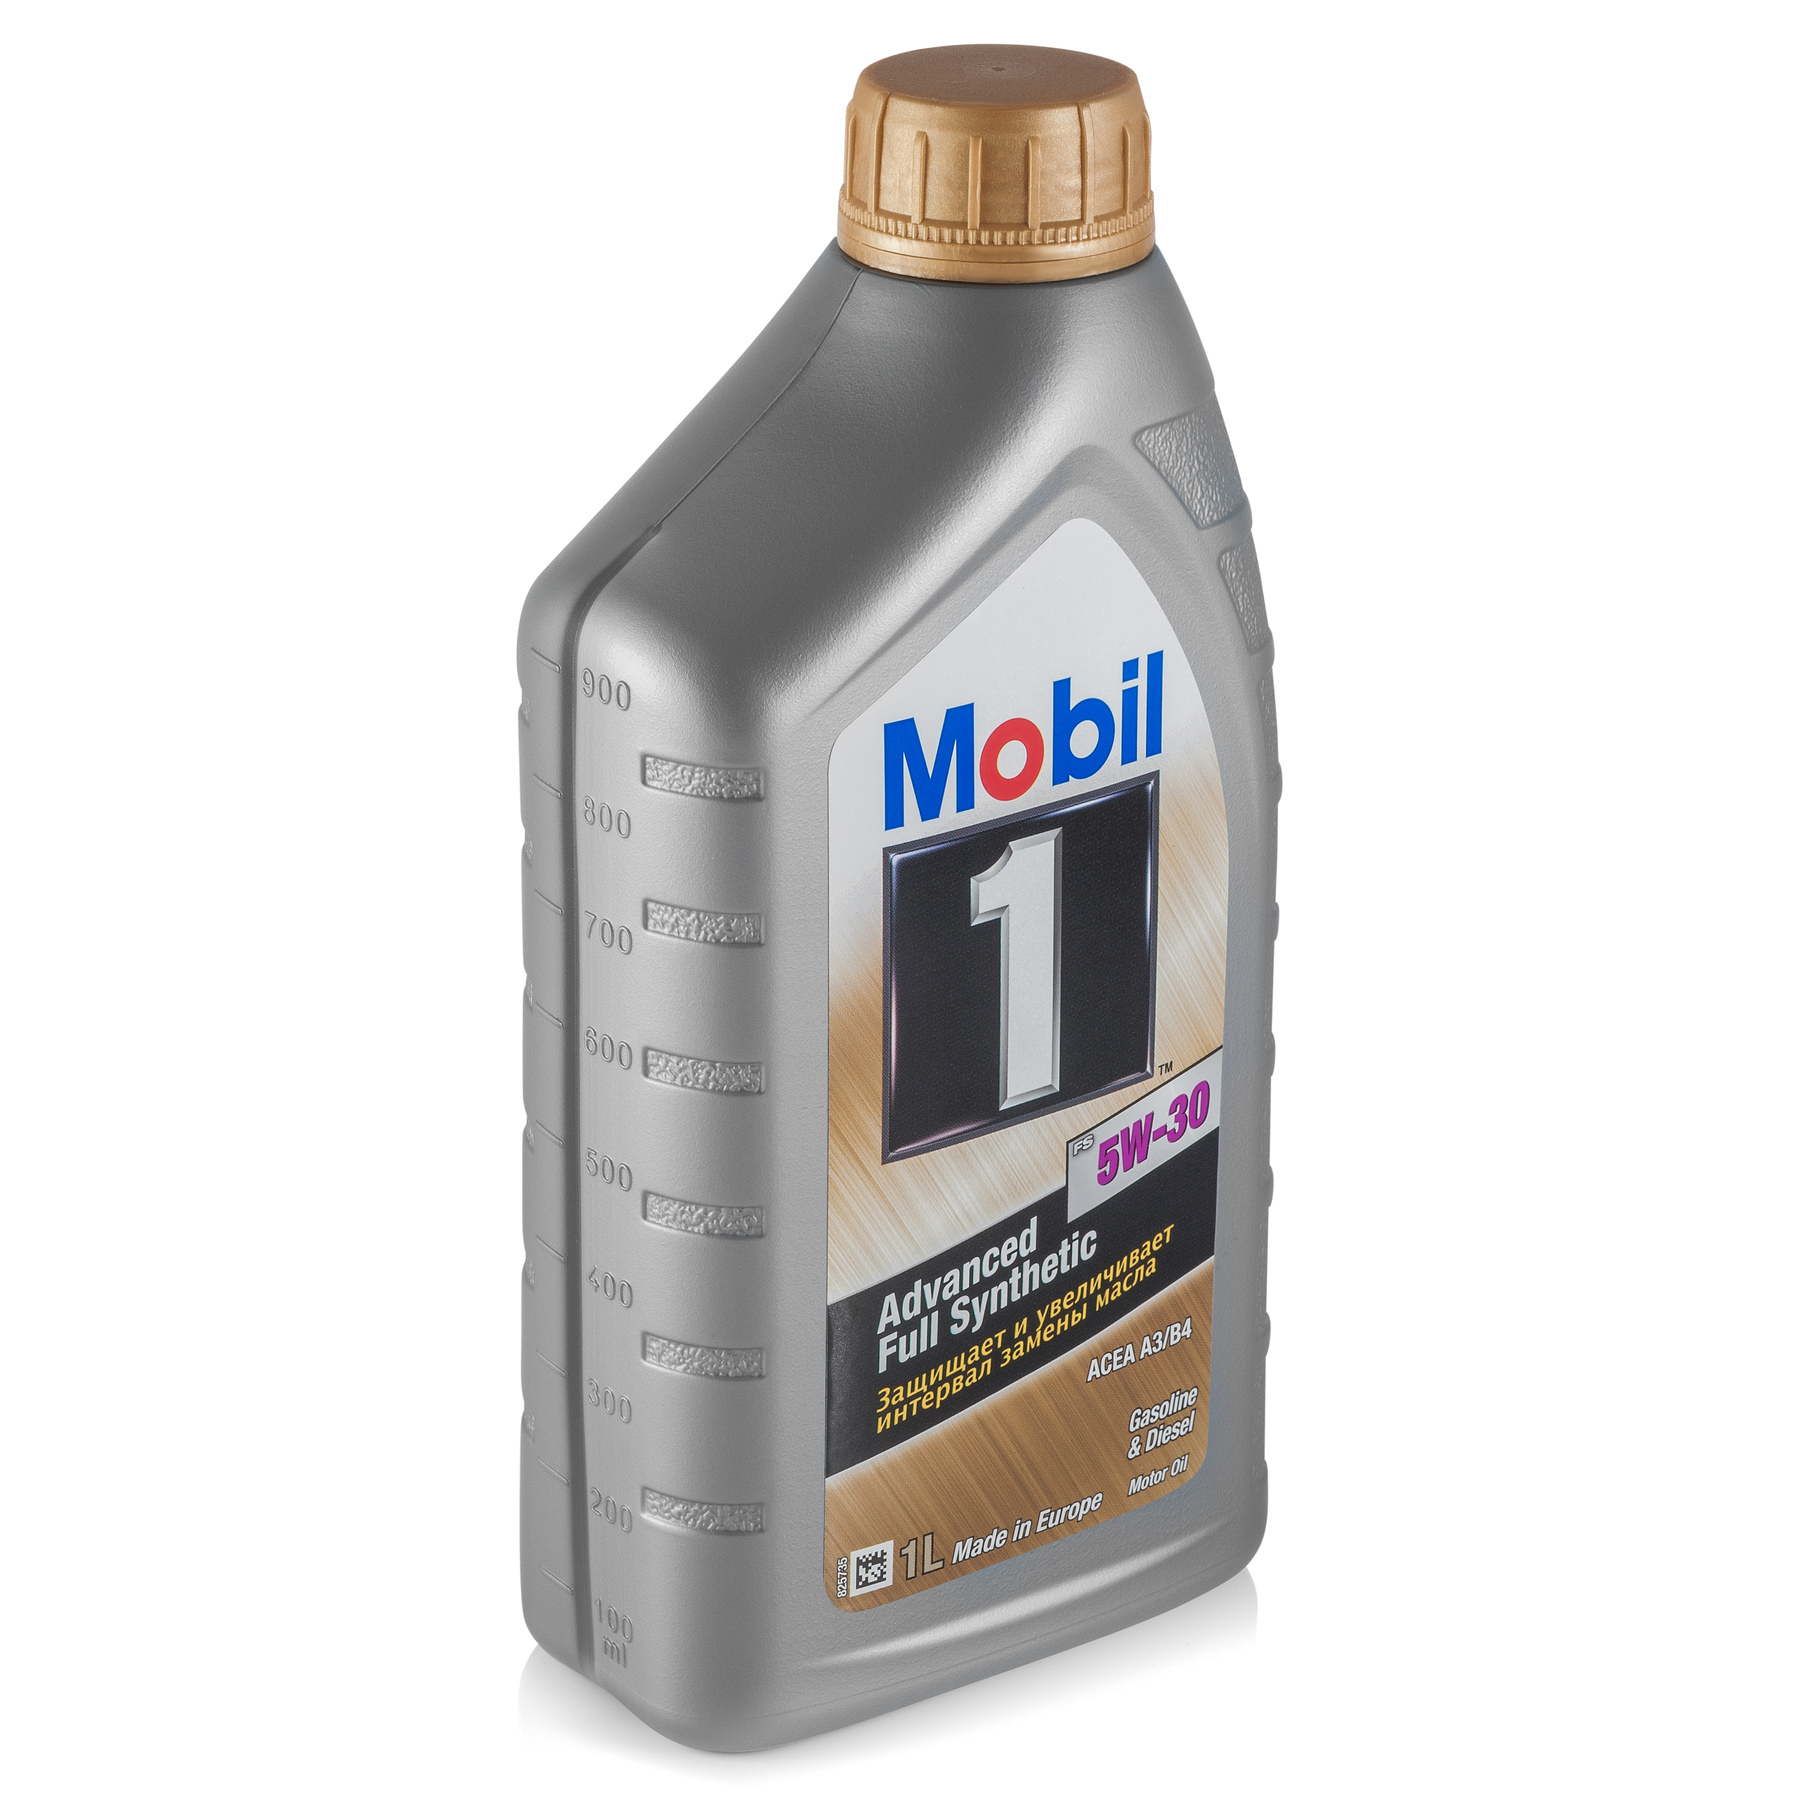 Моторное масло Mobil 1 Full Synthetic 5W-30, 1л Mobil 153749